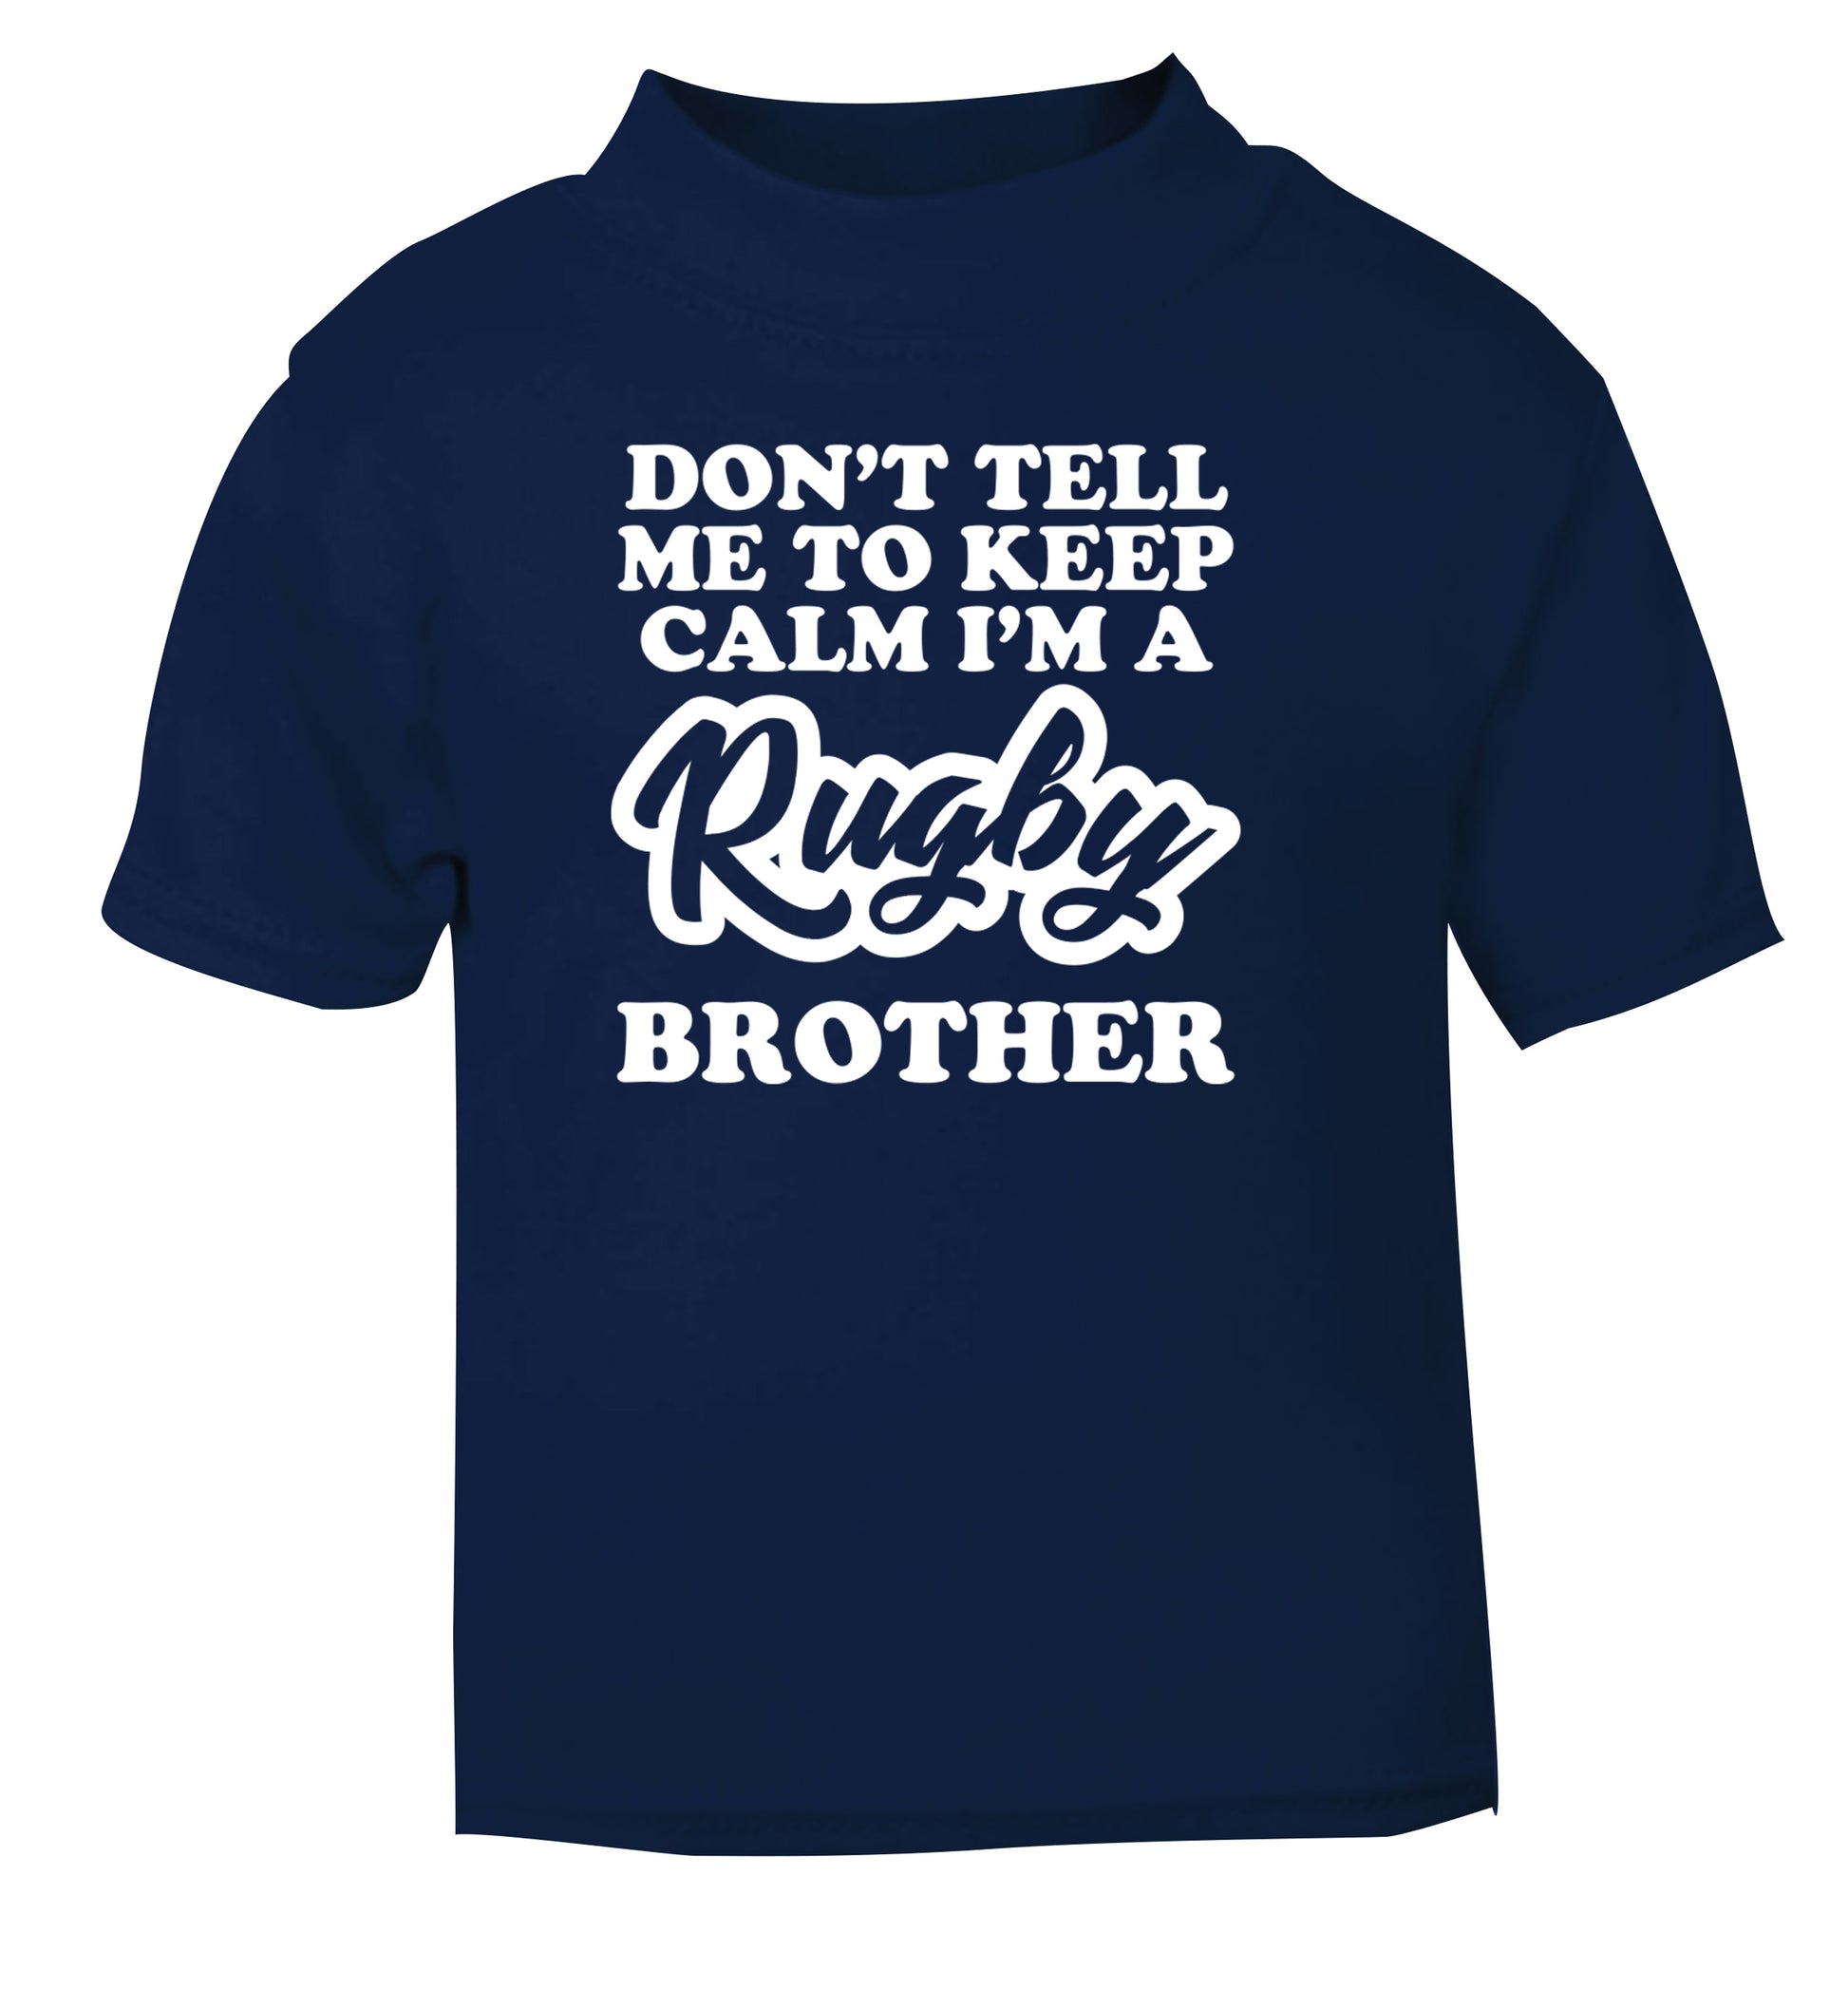 Don't tell me keep calm I'm a rugby brother navy Baby Toddler Tshirt 2 Years